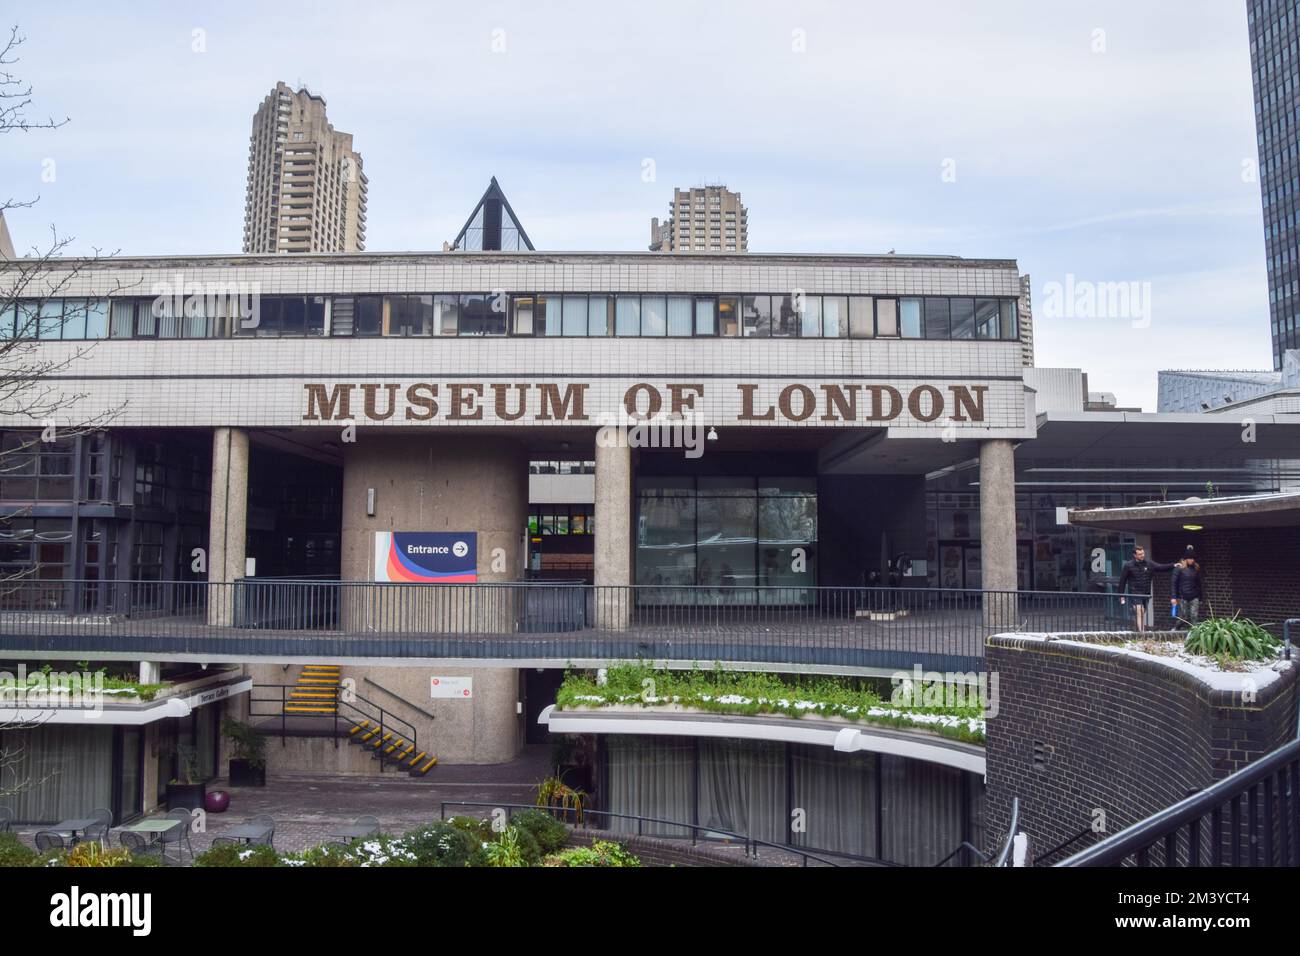 London, UK. 17th December 2022. Exterior view of the Museum Of London. The Museum Of London has permanently closed its London Wall site next to the Barbican ahead of the relocation to Smithfield Market. Due to open in 2026, it will change its name to London Museum. Credit: Vuk Valcic/Alamy Live News Stock Photo